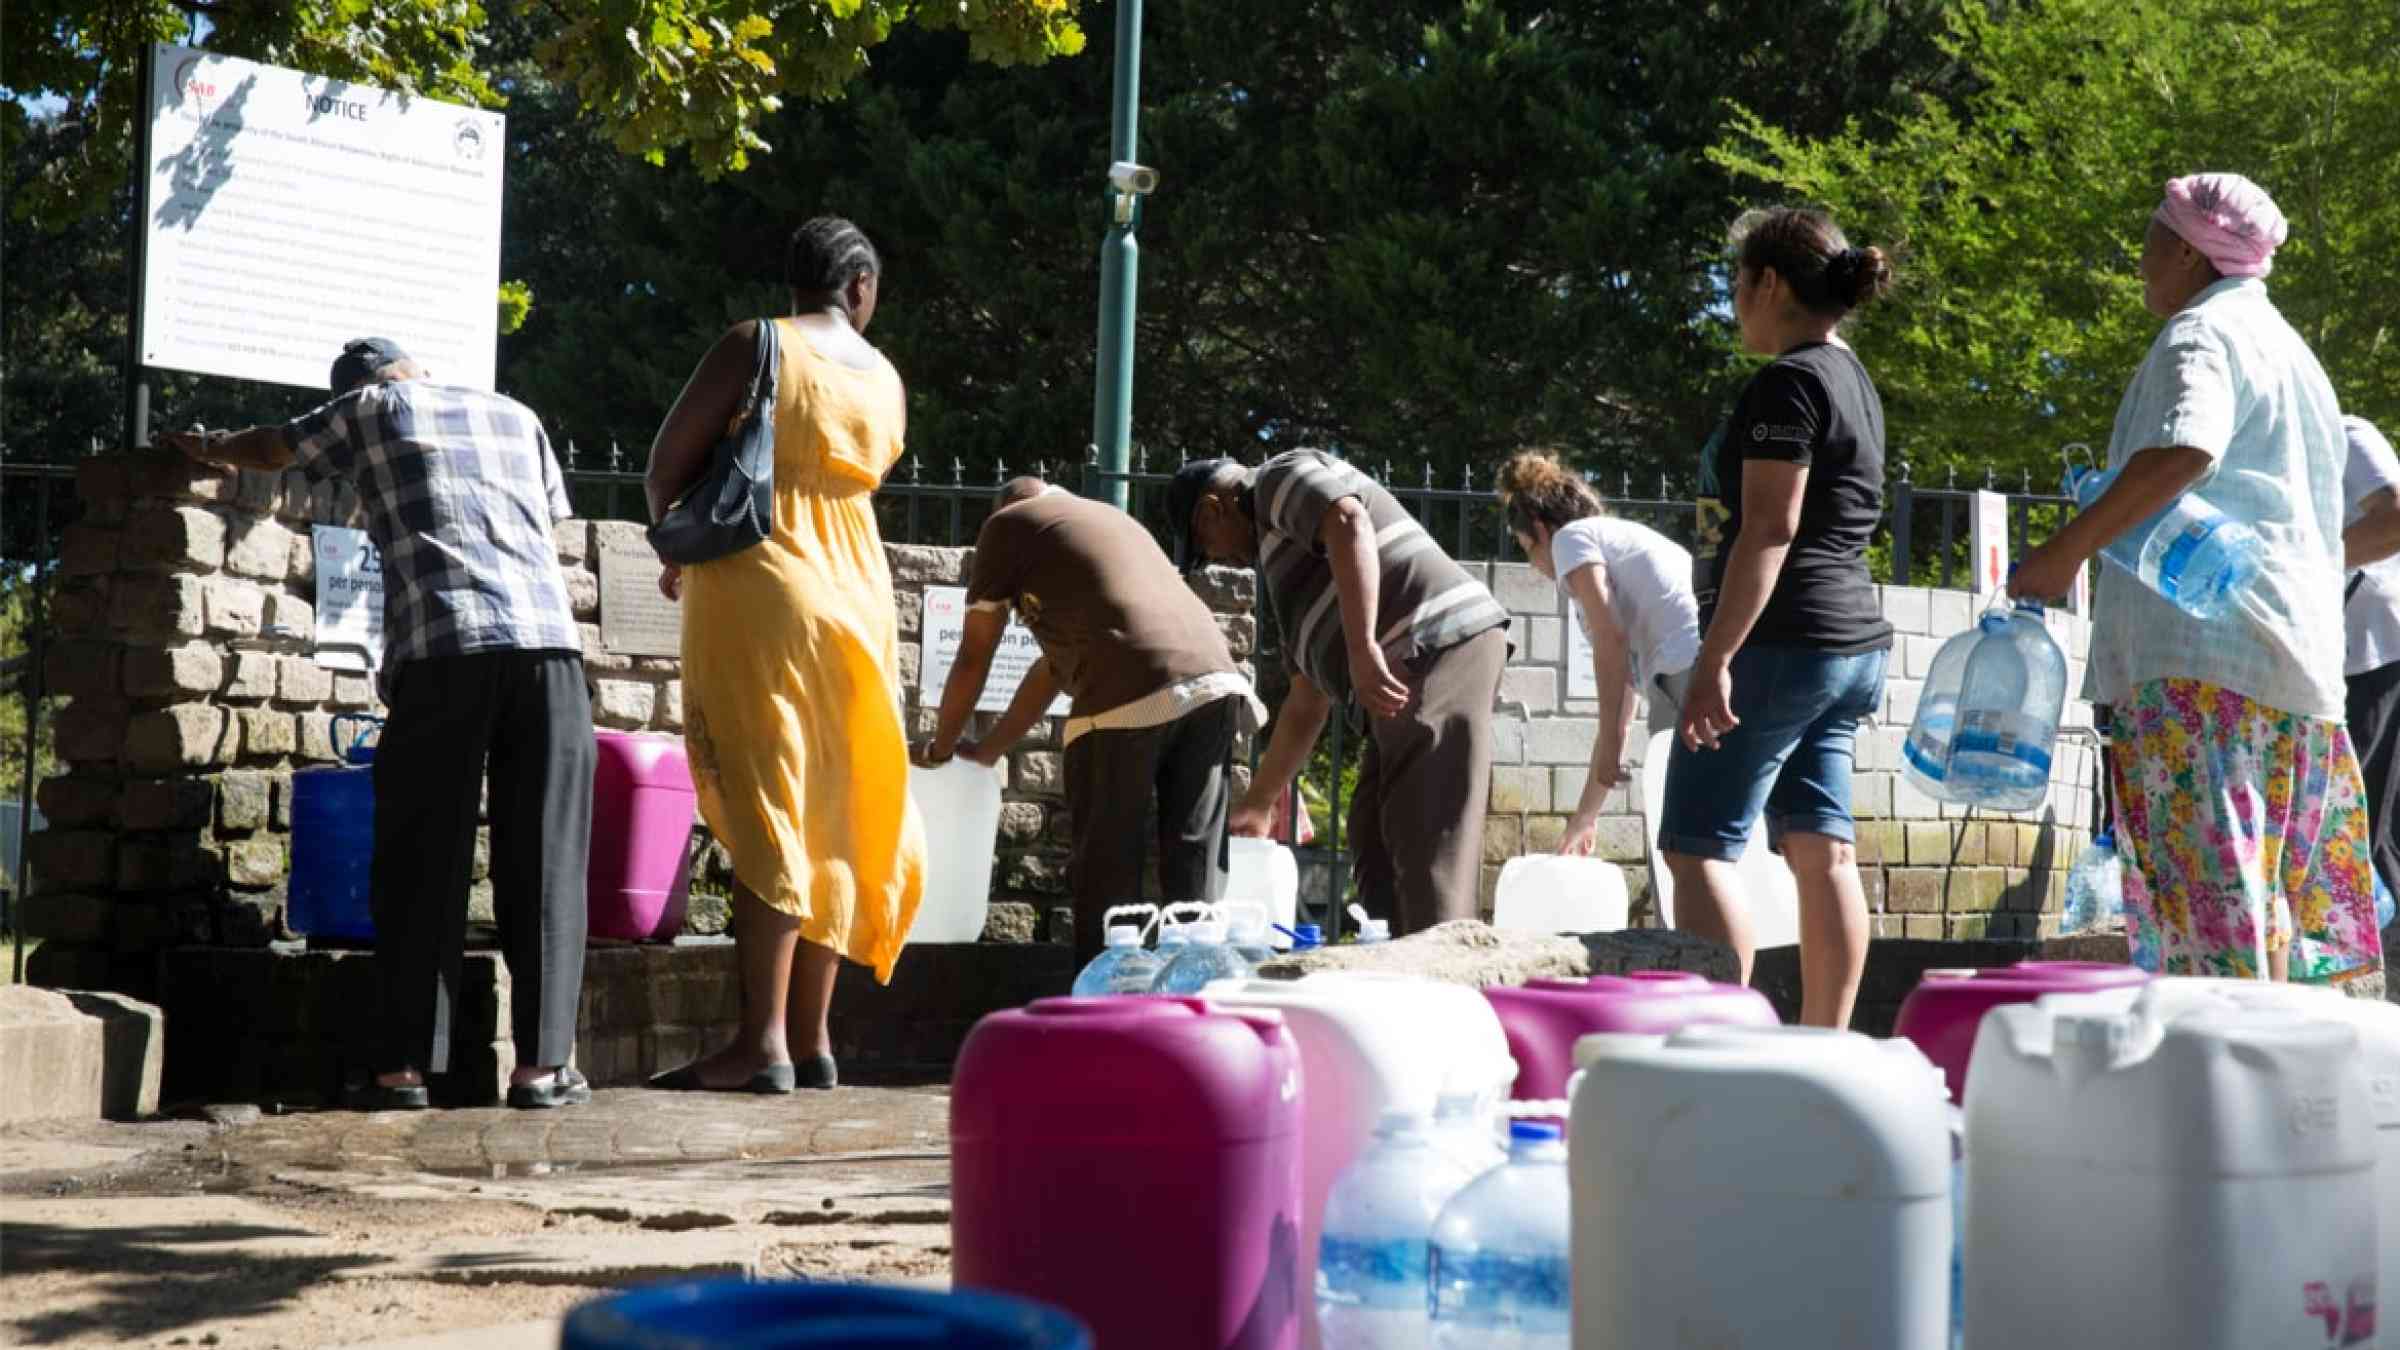 Lines of people waiting to collect natural spring water for drinking during the drought in Cape Town, South Africa (2018)